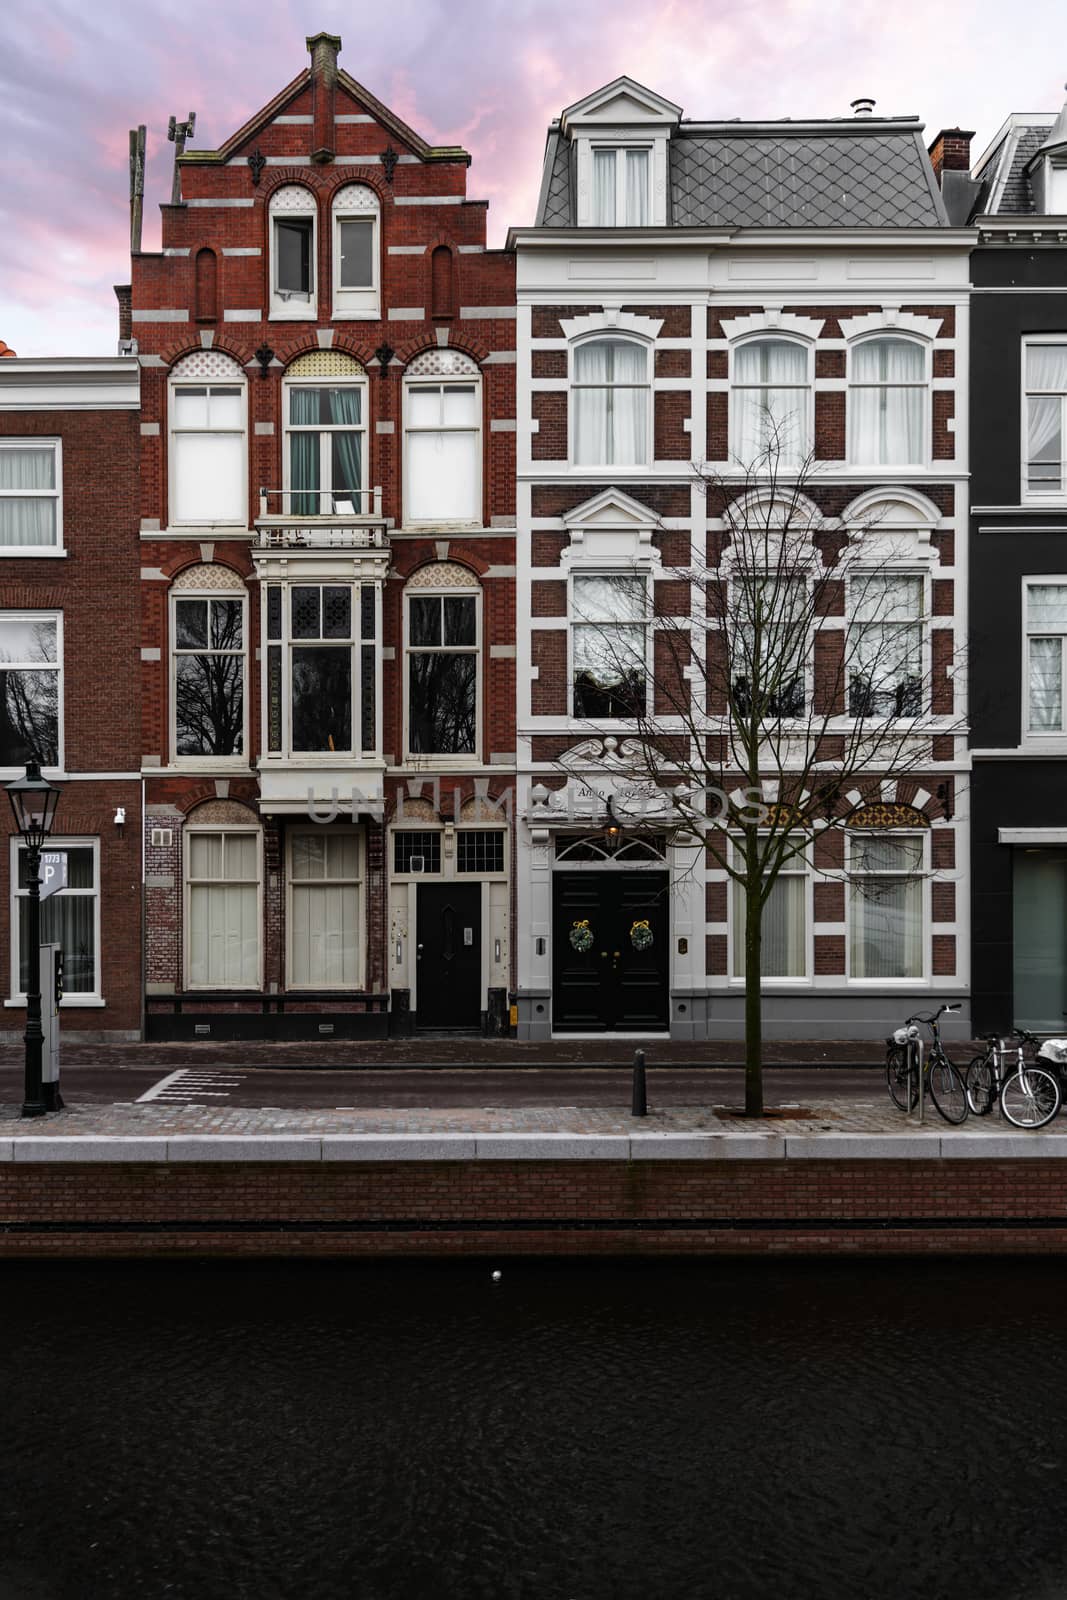 Flemish architecture style building dating from 1875 as stated on the facade and in front a calm canal water at Amsterdam during the sunset time by ankorlight